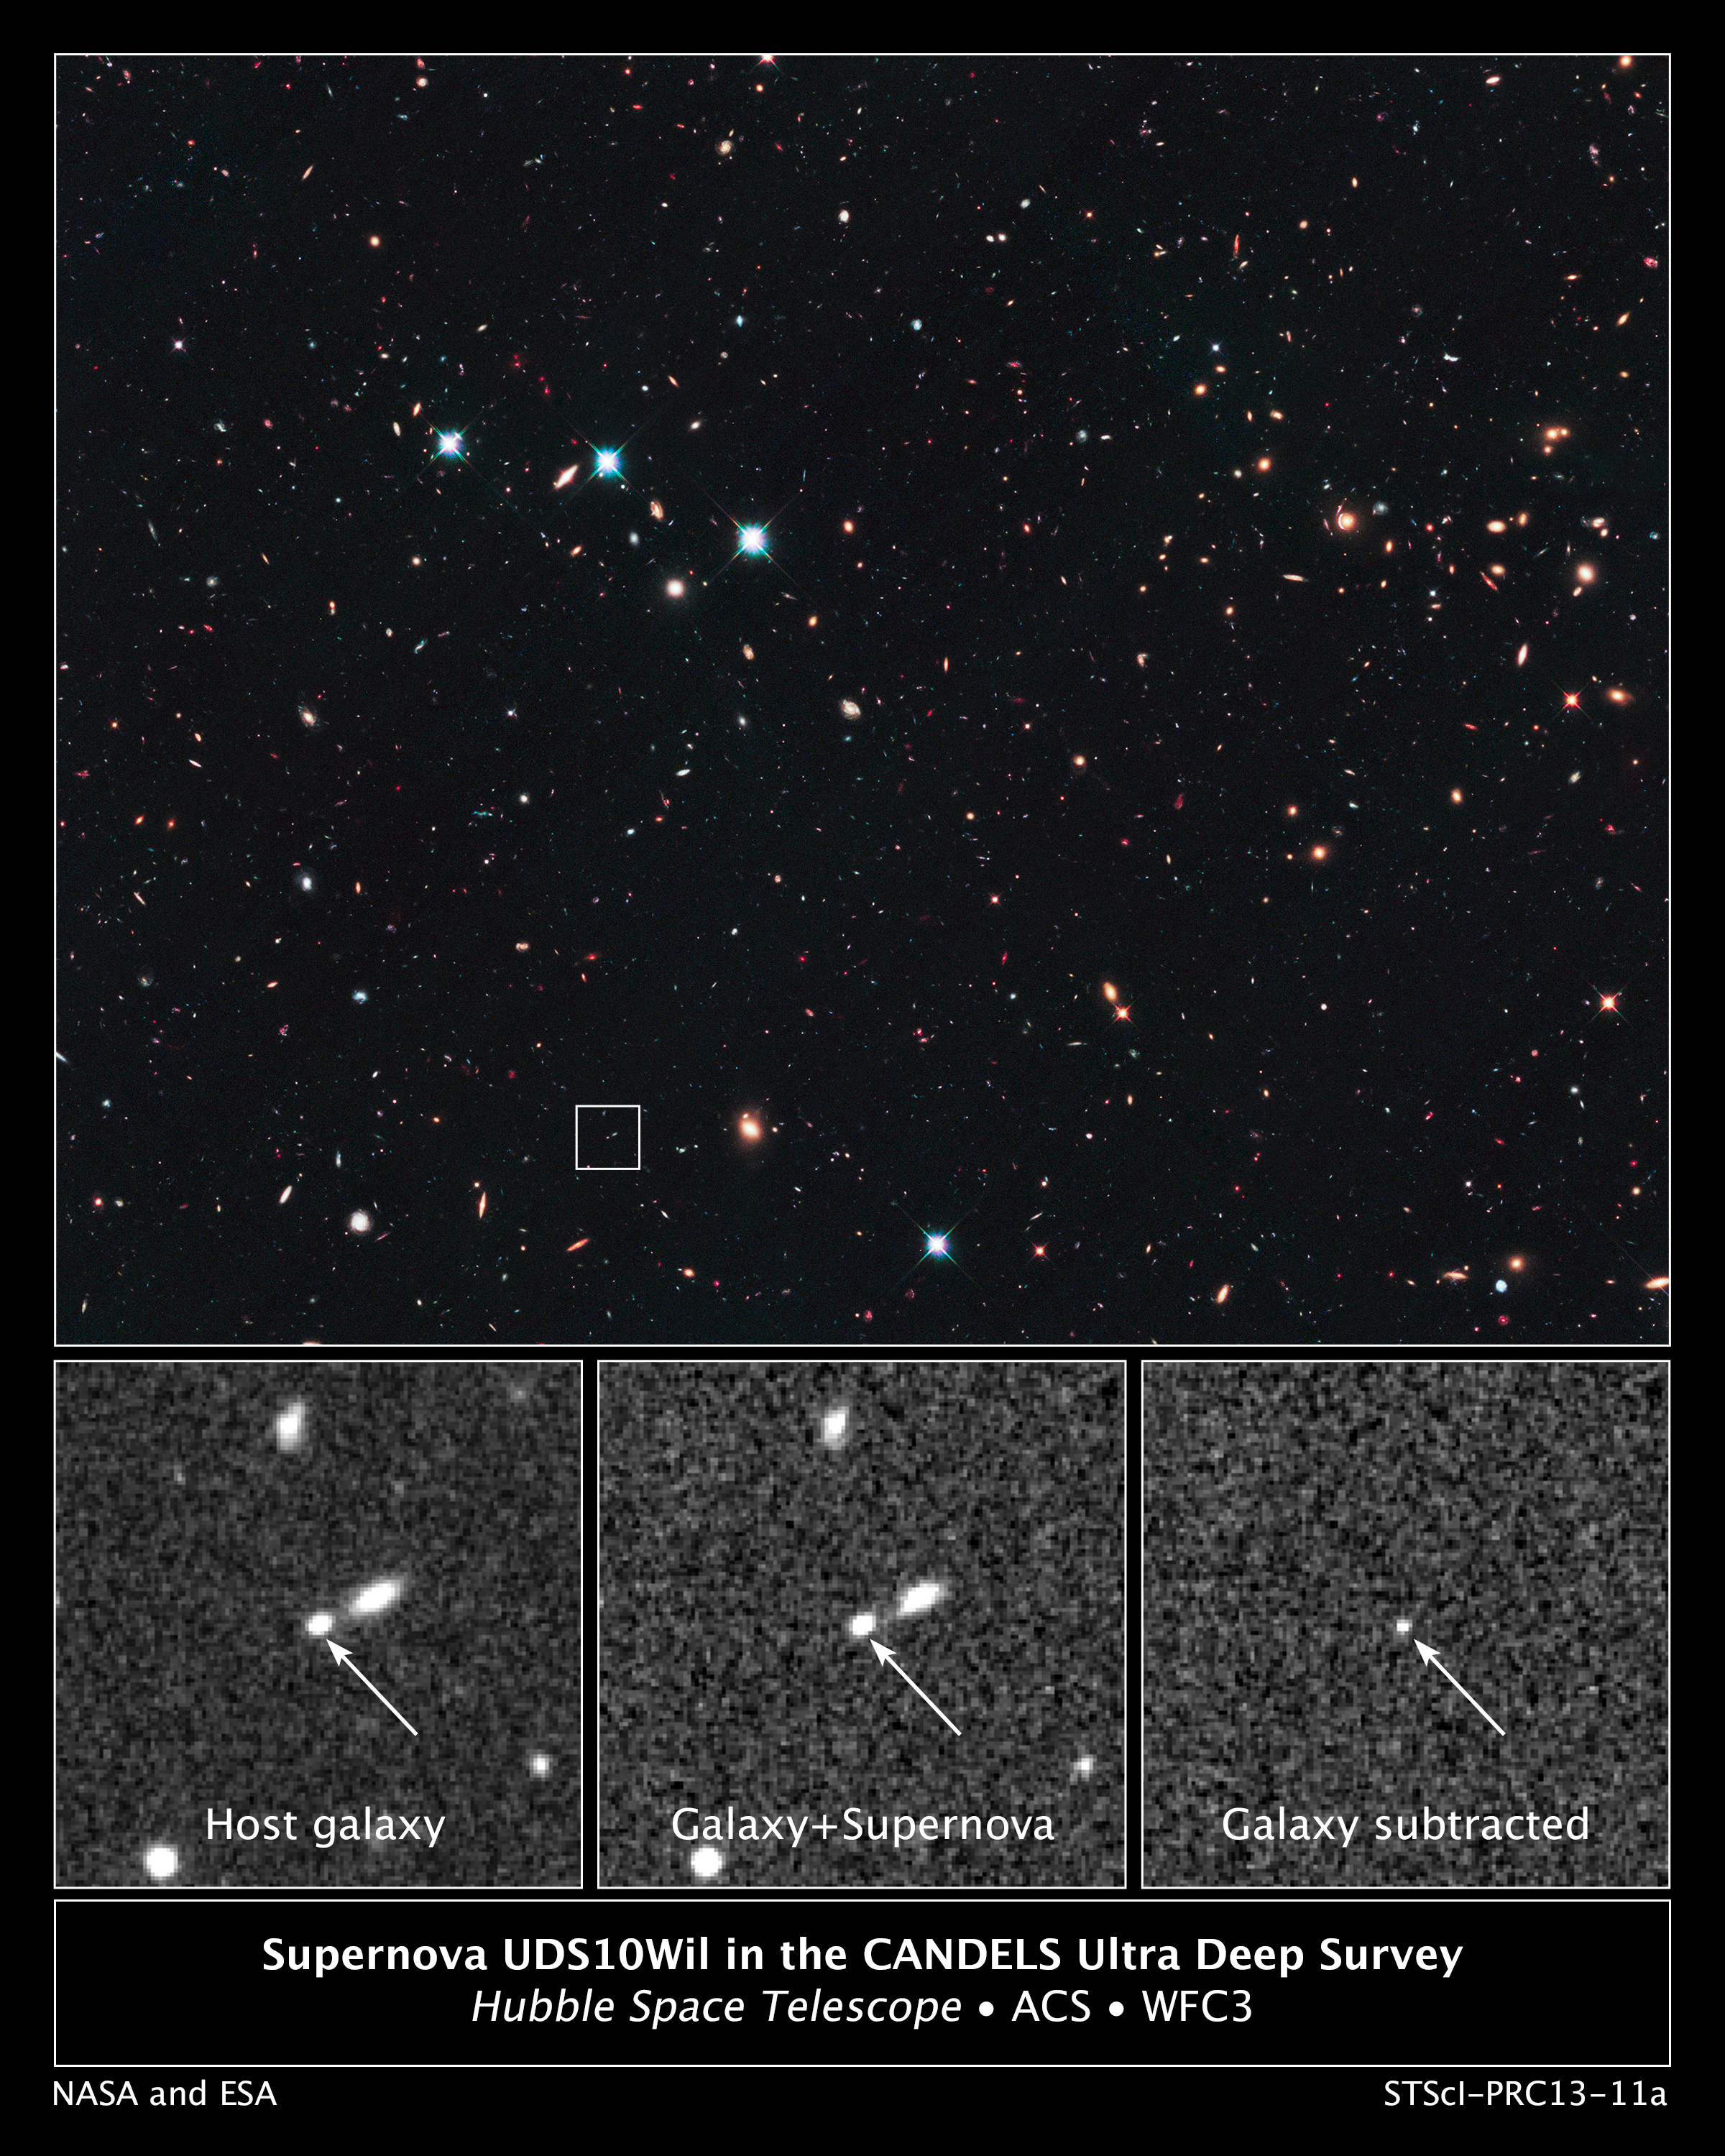 Top image holds a field of galaxies. A small, white box in the lower/left of center region of the image outlines the area of sky viewed in the three bottom images. The bottom images are black and white